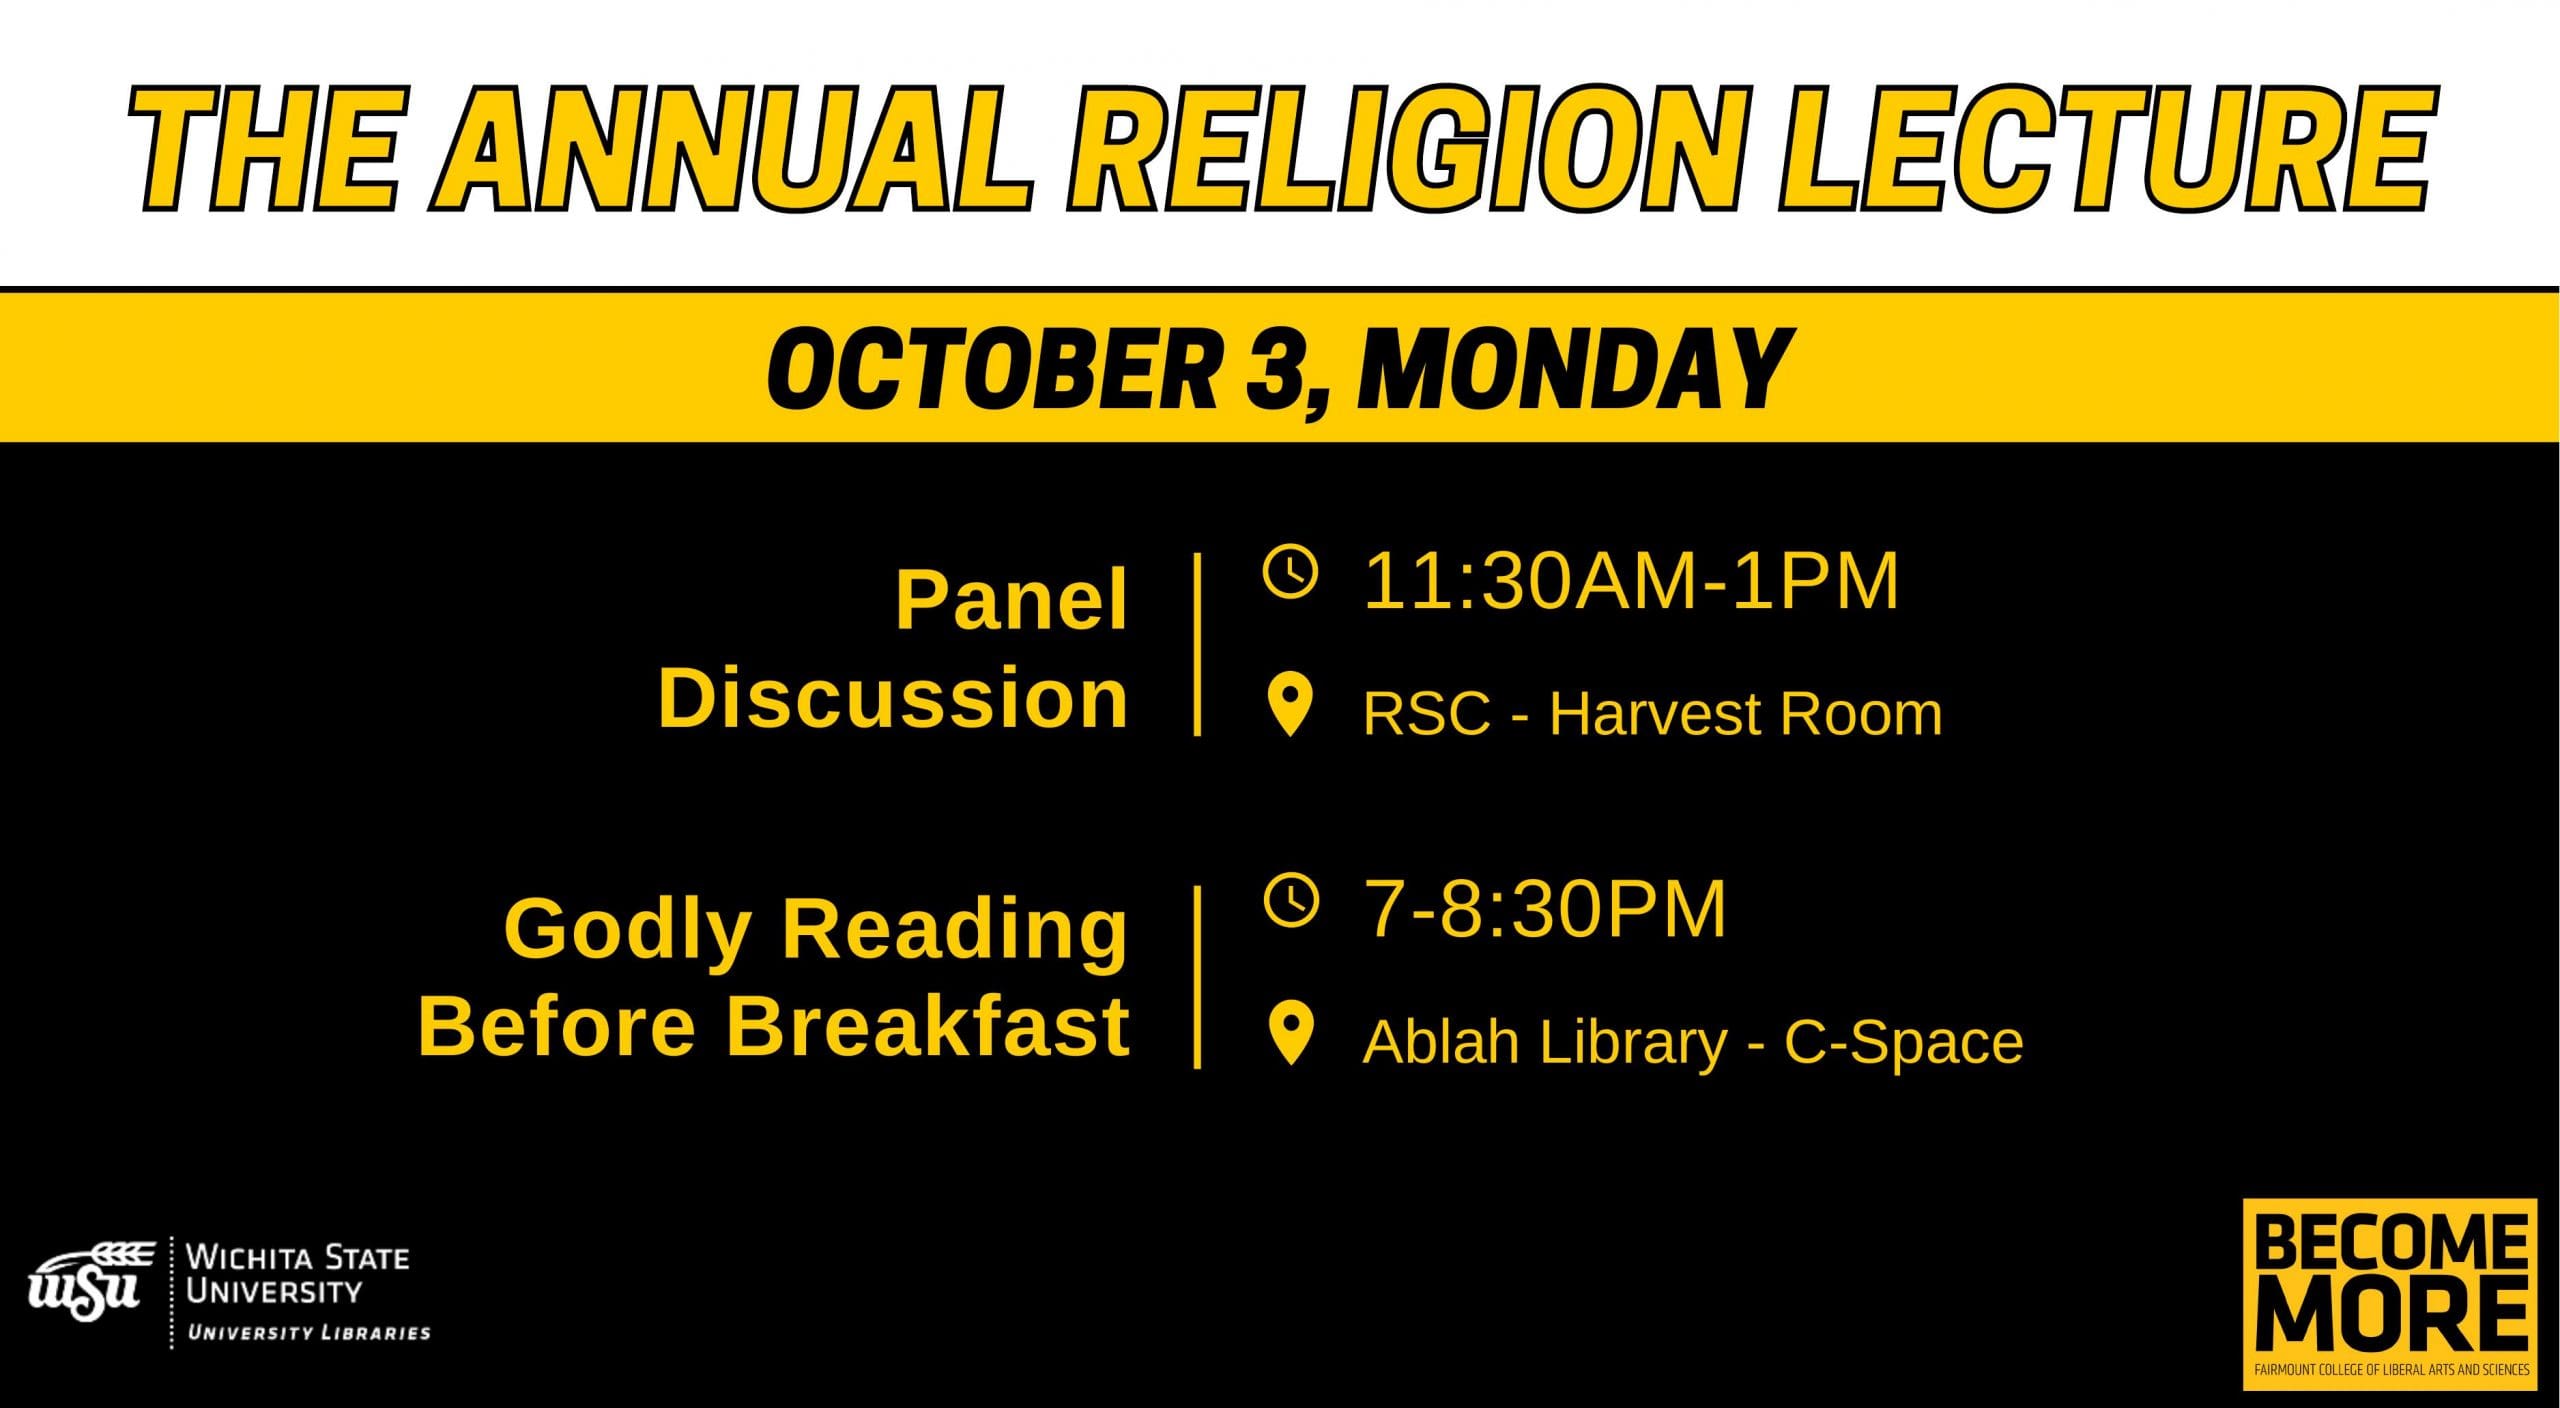 The Annual Religion Lecture October 3, Monday Panel Discussion 11:30am-1pm RSC - Harvest Room Godly Reading Before Breakfast 7-8:30pm Ablah Library - C-Space